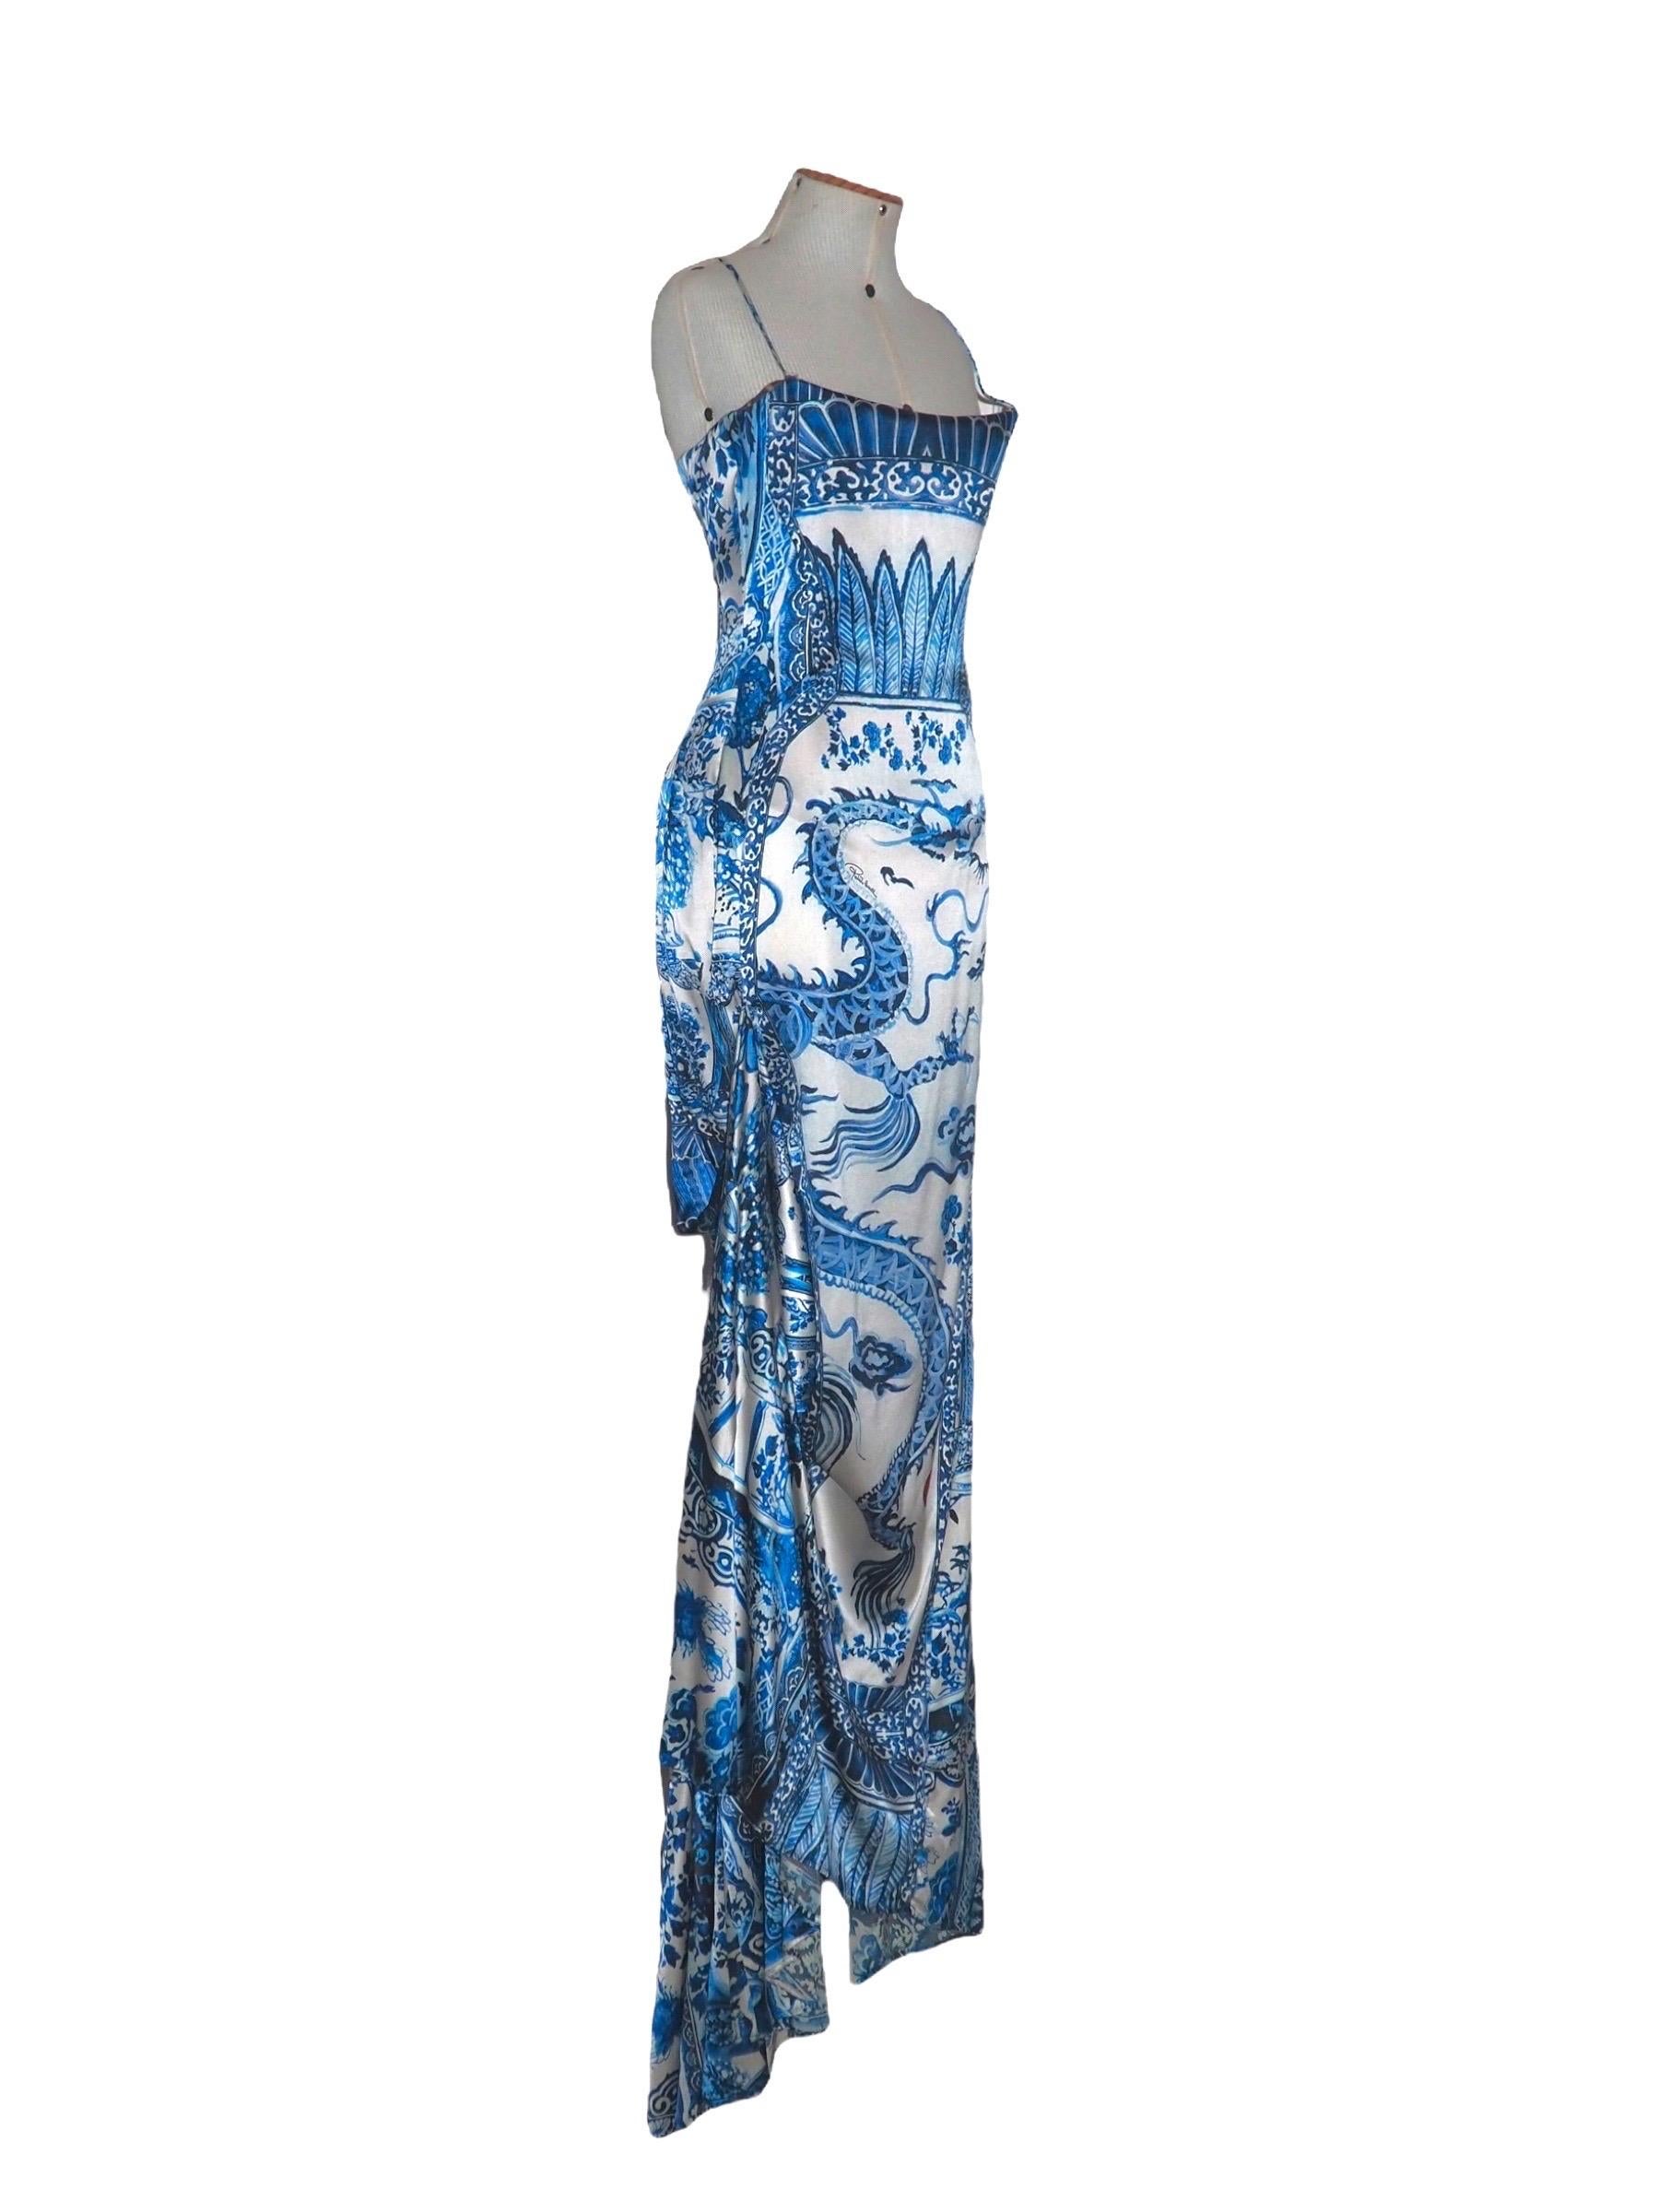 MUSEUM PIECE Roberto Cavalli FW 2005 Runway Tile Print Corseted Gown In Excellent Condition In São Paulo, SP